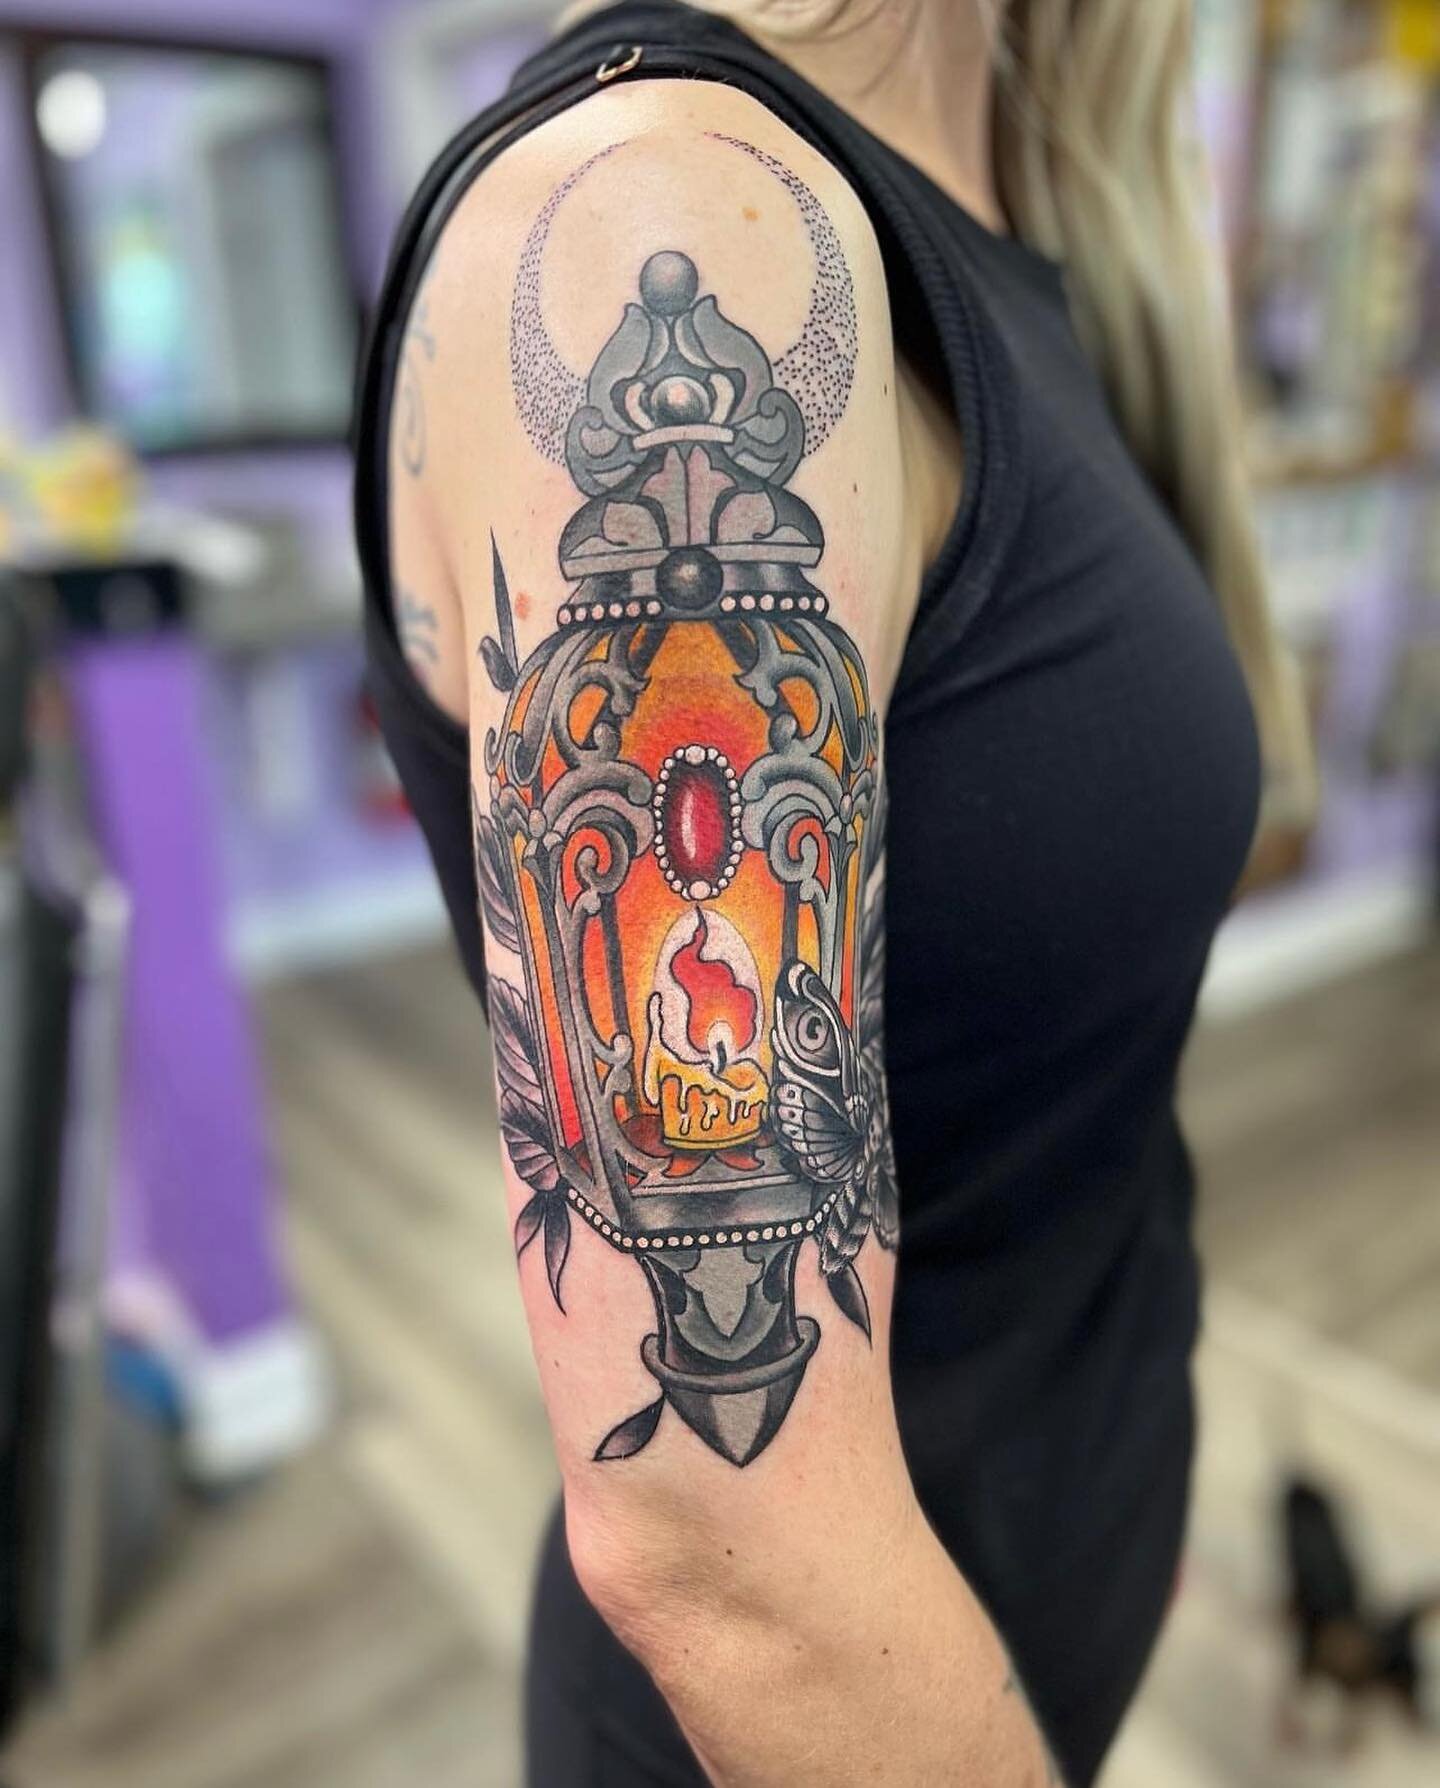 Let us shine the way to a lit new tattoo 🕯🔥
Lantern tattoo done by @robmotherfuckinjohnson!
Come in for some walk-ins or to set an appointment with an artist!